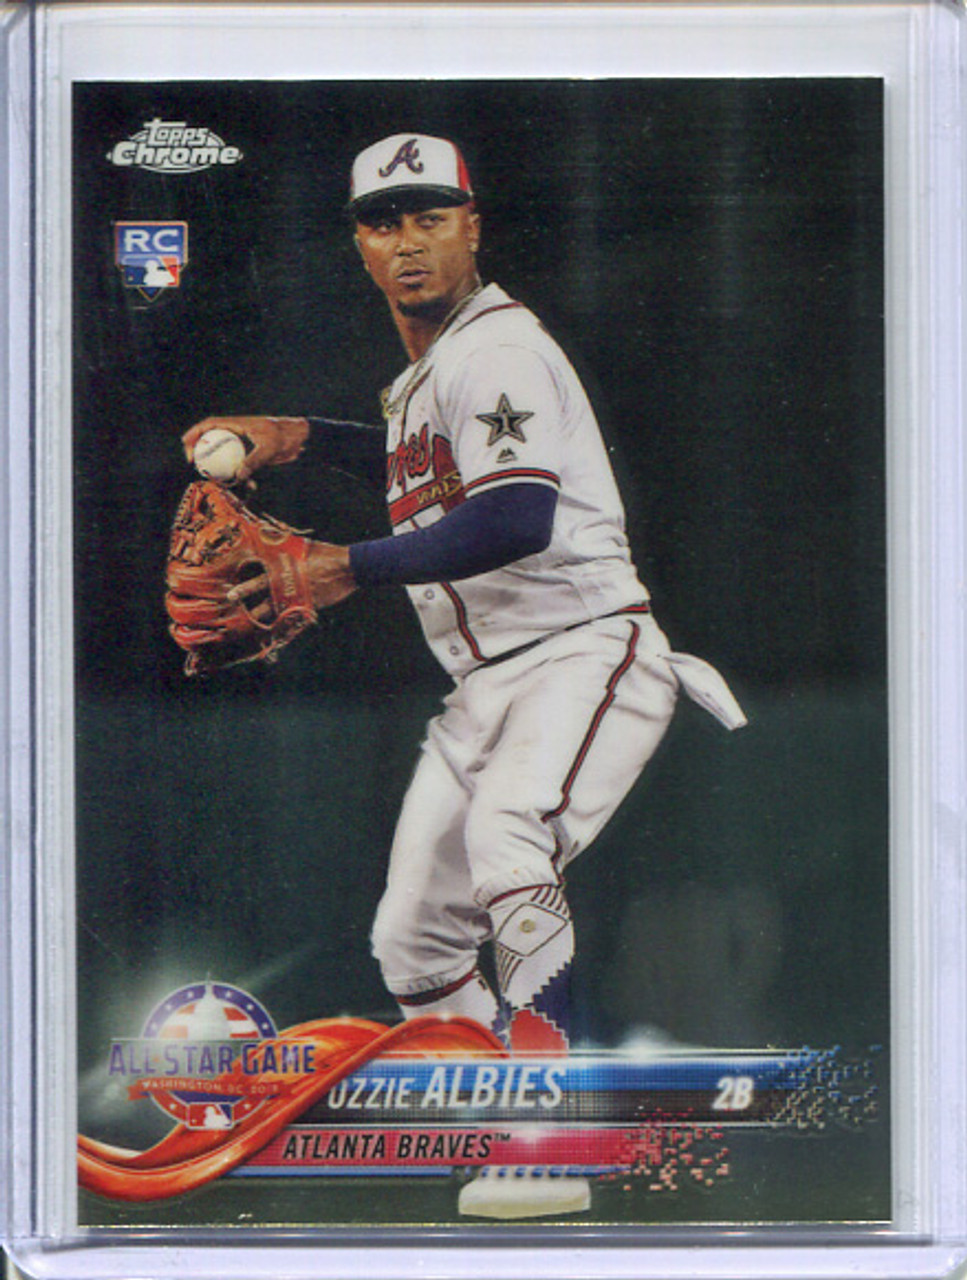 Ozzie Albies 2018 Topps Chrome Update #HMT76 All-Star